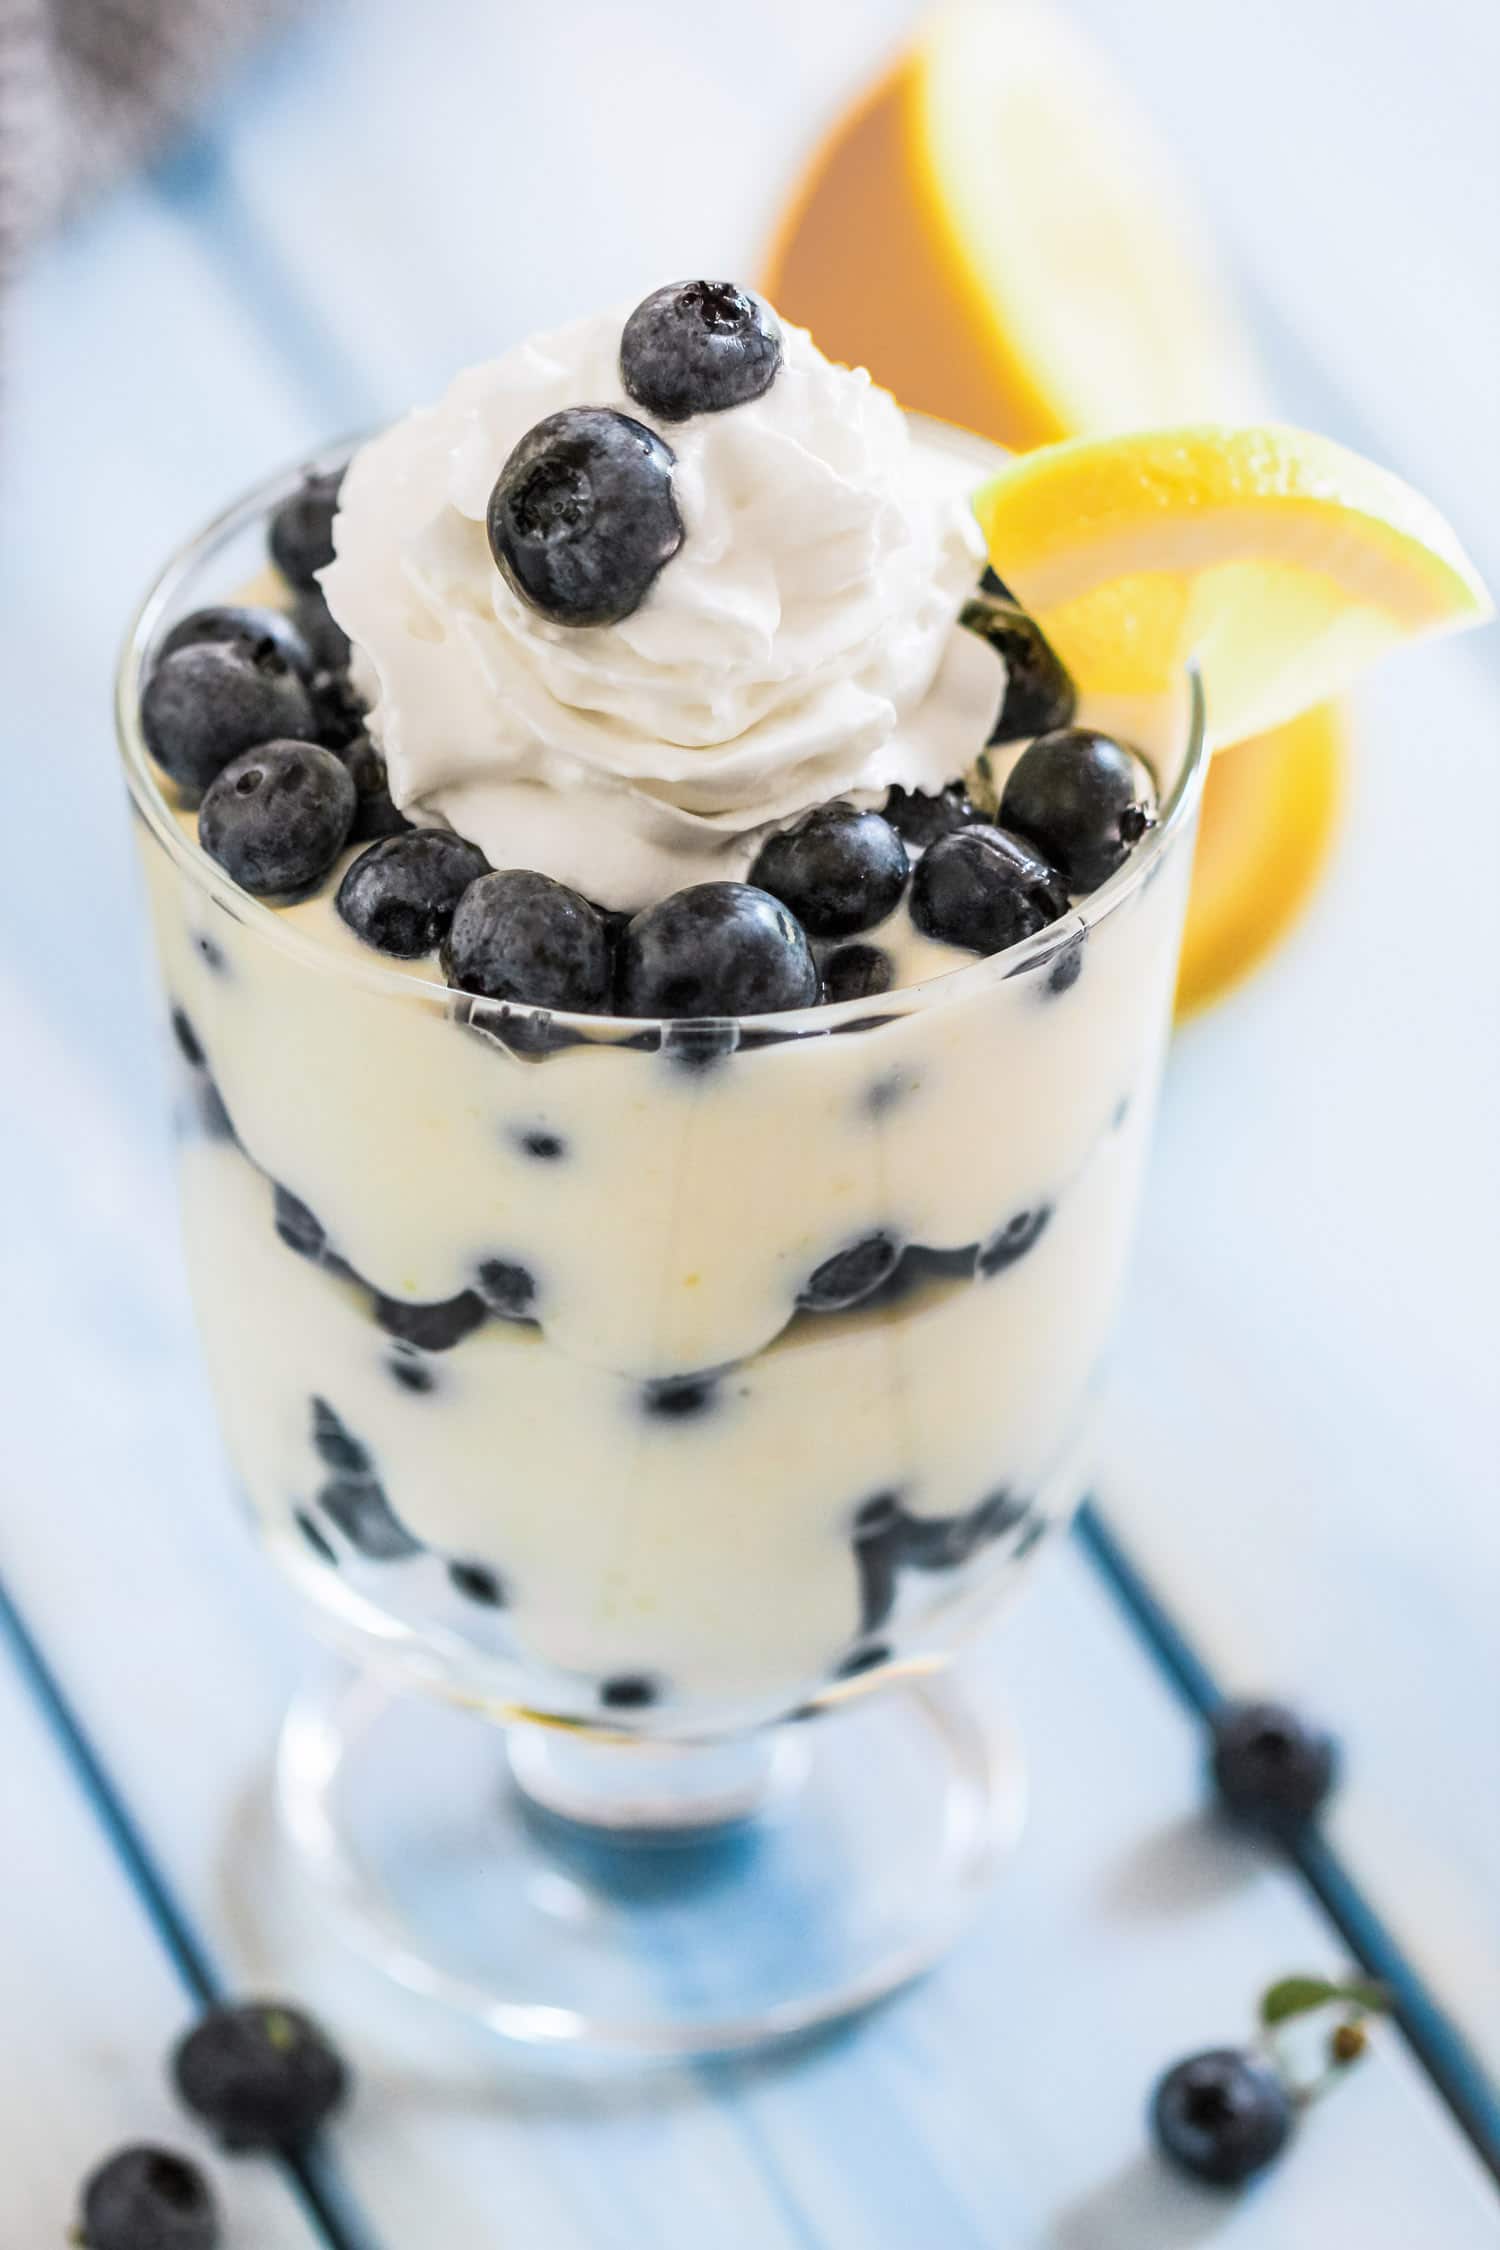 4-ingredient Blueberry Lemon Ricotta Parfaits! Beautiful, sophisticated, SO easy to make. The tart lemon balances the rich and creamy ricotta layers, and the blueberries complement both perfectly. Sugar free, low carb, high protein, and gluten free too! Healthy Dessert Recipes at the Desserts With Benefits Blog